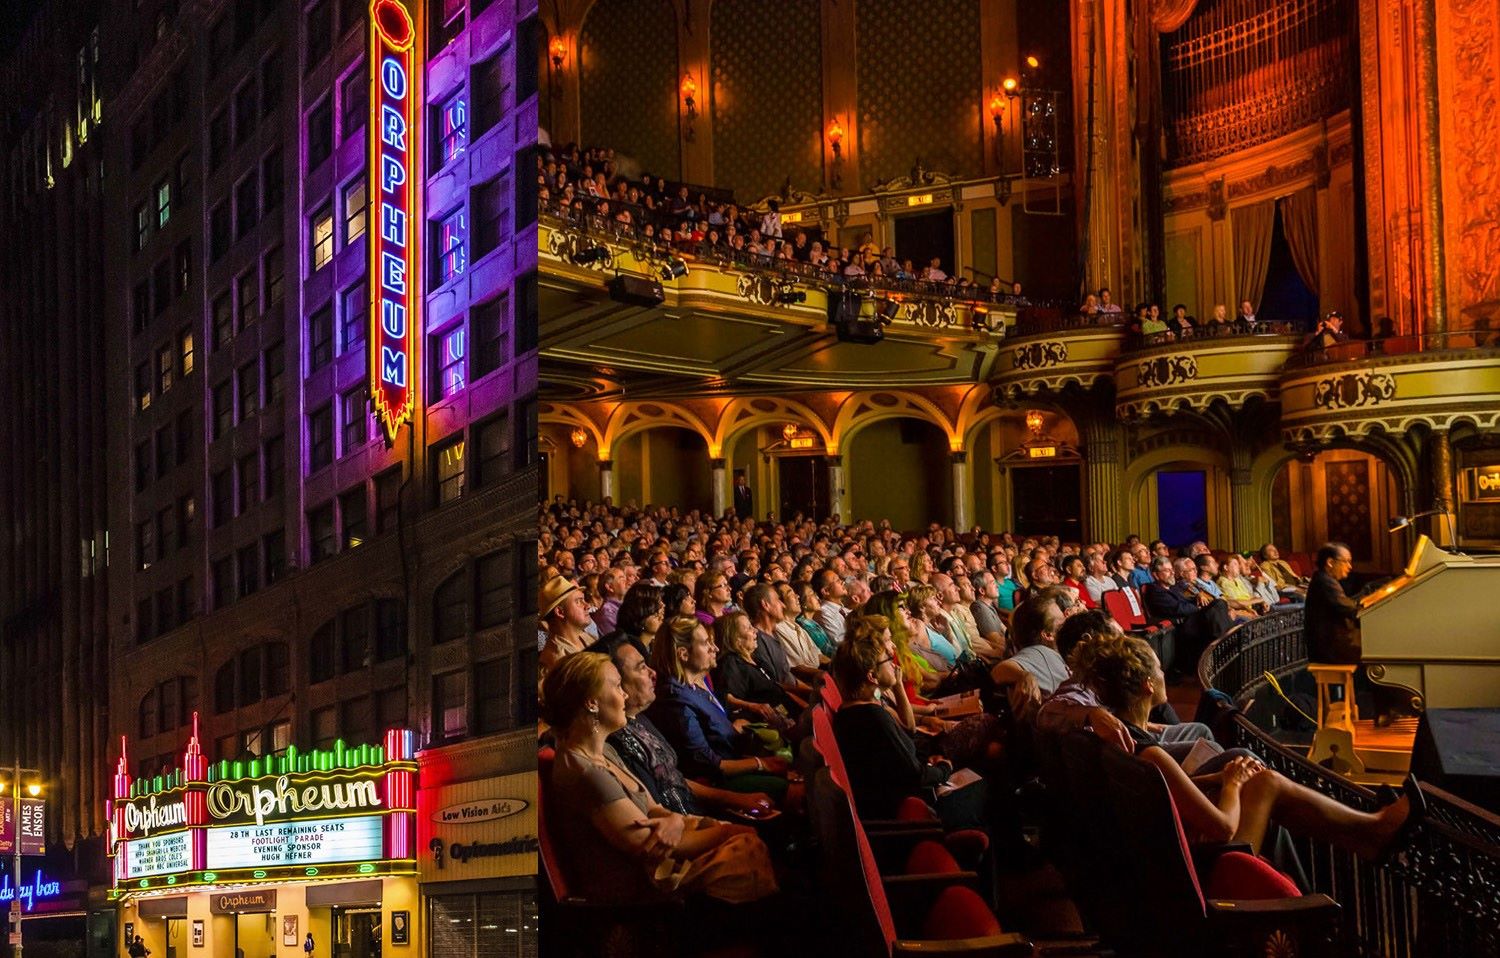 17-intriguing-facts-about-orpheum-theatre-los-angeles